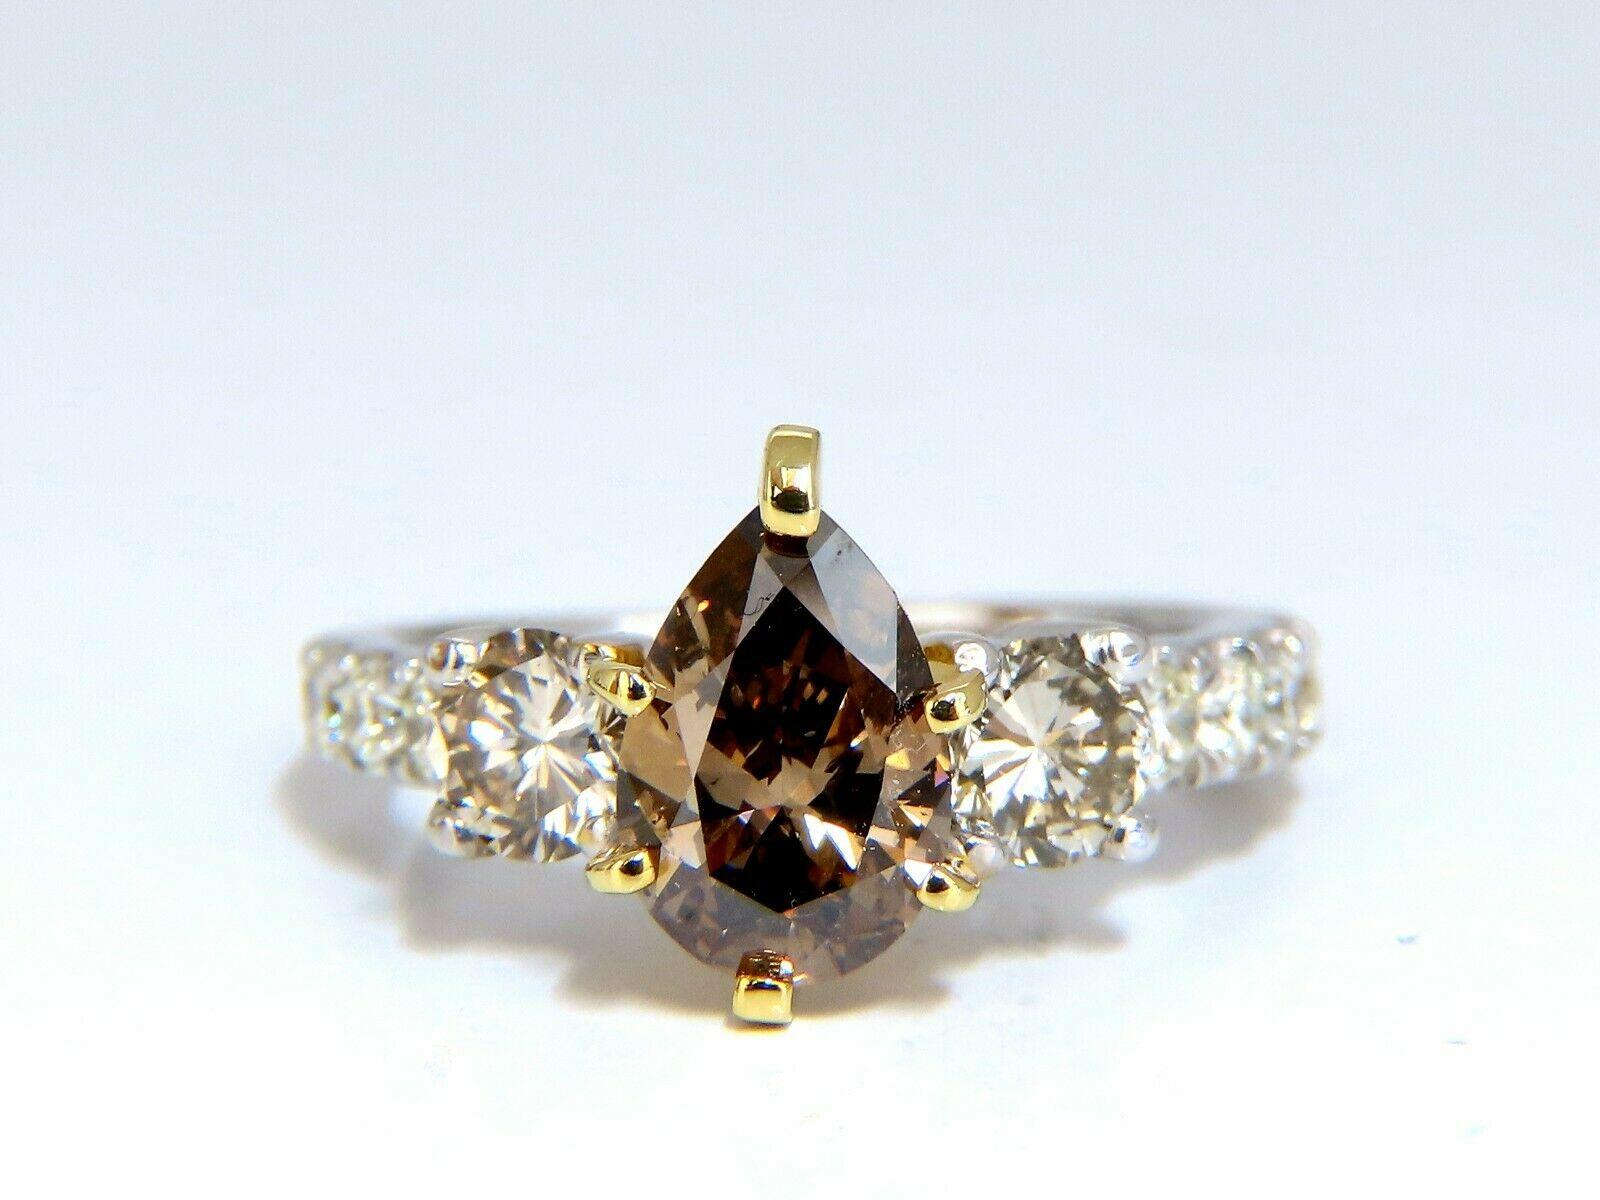 Classic Three & Accent.

1.30ct. Natural Pear diamond ring

Fancy brown color

 Si-1 clarity 

7.6 x 6.2mm

Very good Cut / Full cut Brilliant

Side round white diamonds:

1.00ct Fancy Light Brown color & Si-1 clarity (.50ct each).

Additional .50ct